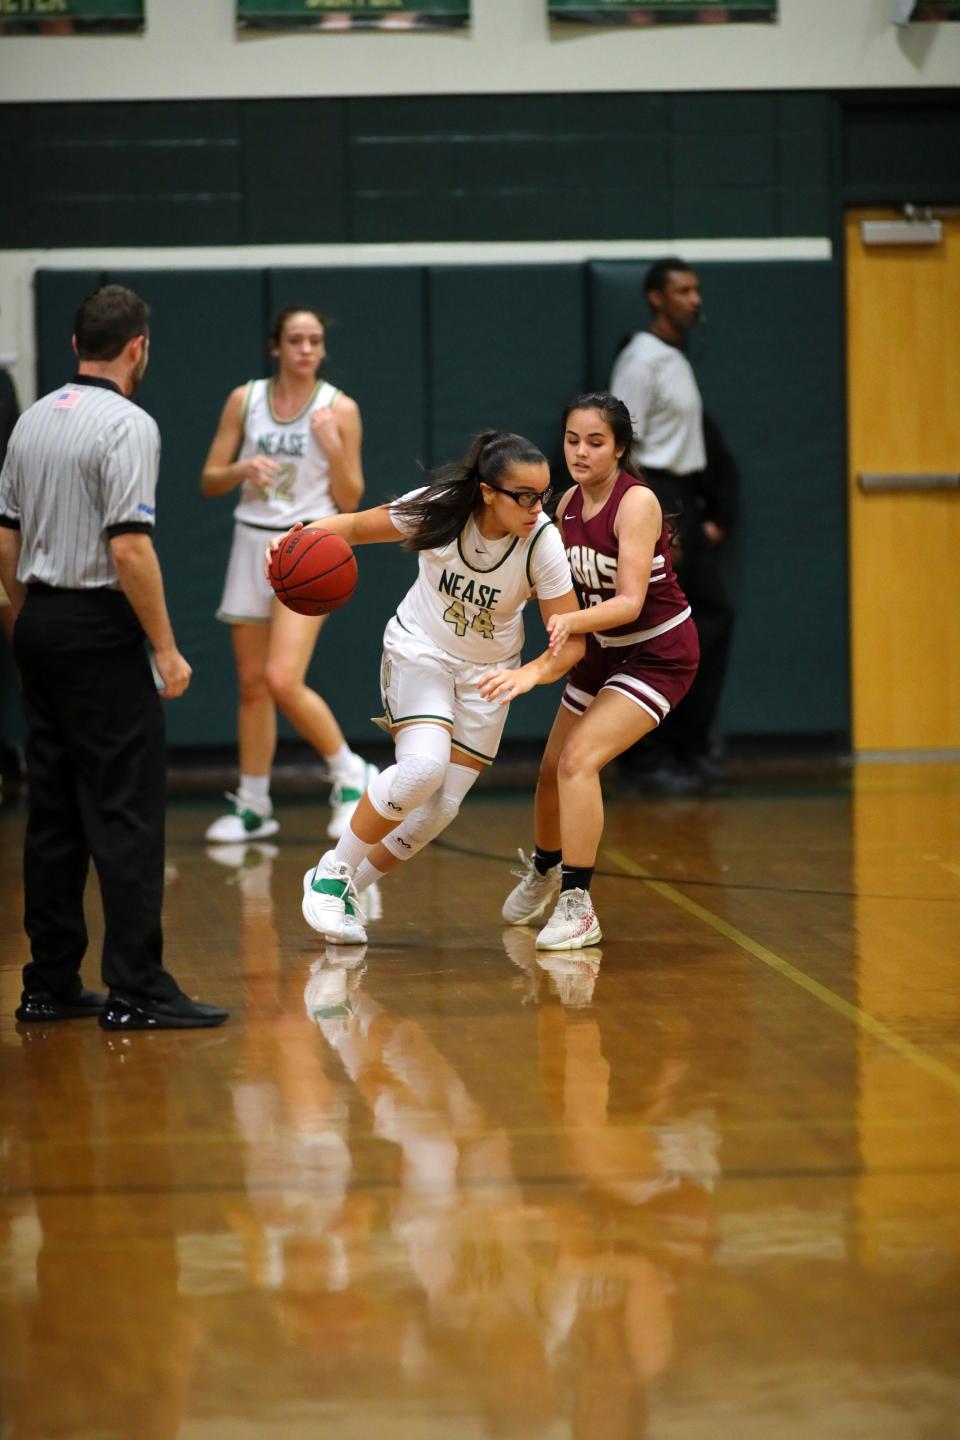 Junior guard Sydney Gomes (44) transferred to Nease after moving to the area from Staten Island. She tallied more than 1,300 points in her first two years at New Dorp (N.Y.), setting Staten Island records along the way. She is averaging 23 points per game to start the 2020-21 season.